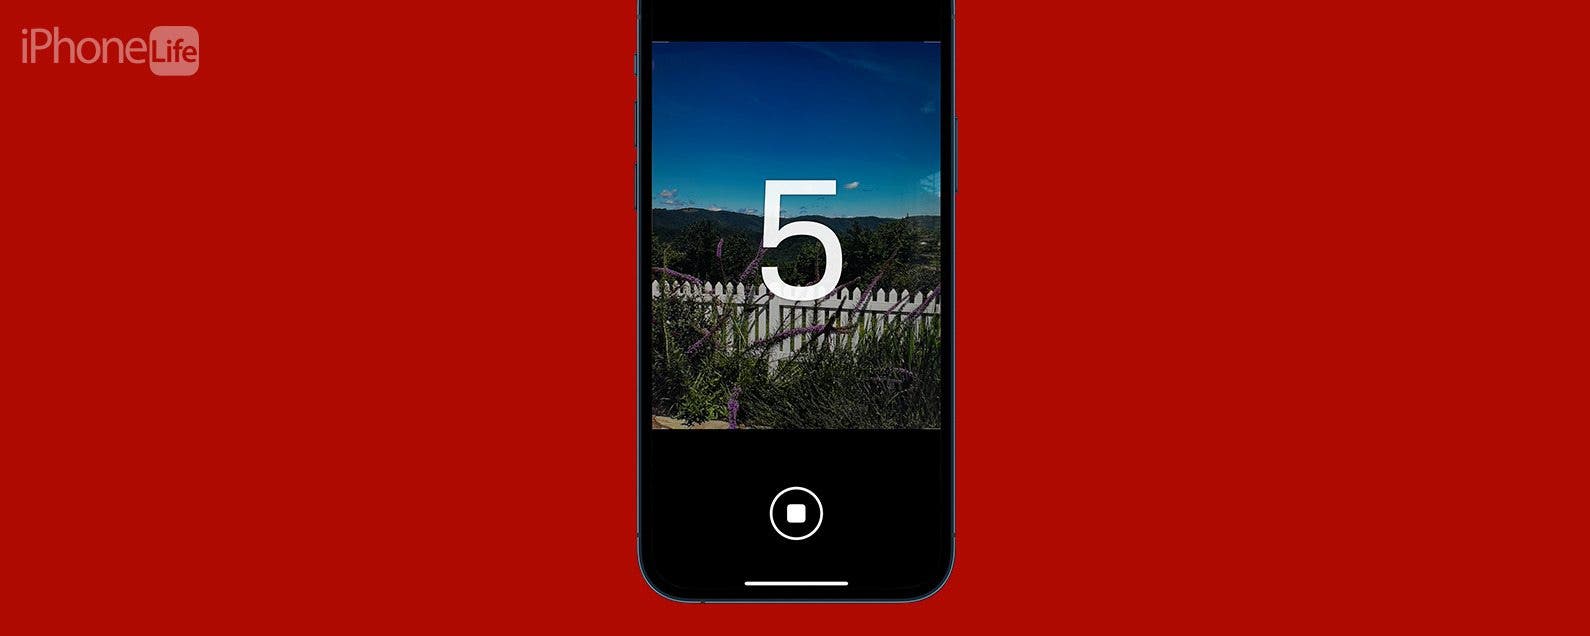 How to Set an iPhone Camera Timer—the Easy Way!